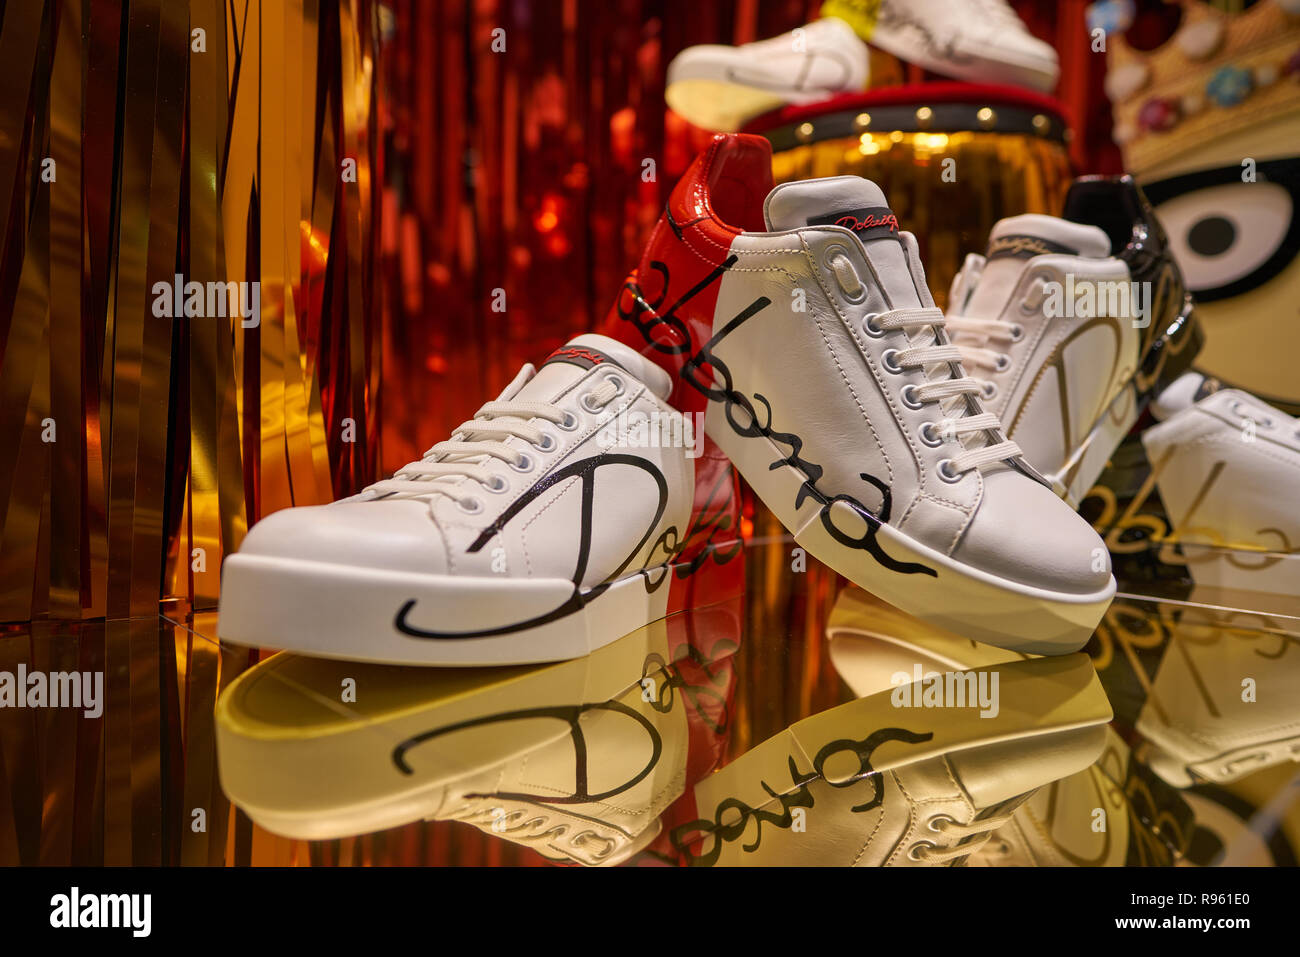 MILAN, ITALY - CIRCA NOVEMBER, 2017: shoes on display at Dolce & Gabbana store in Milan. Dolce & Gabbana is an luxury fashion house Stock Photo - Alamy